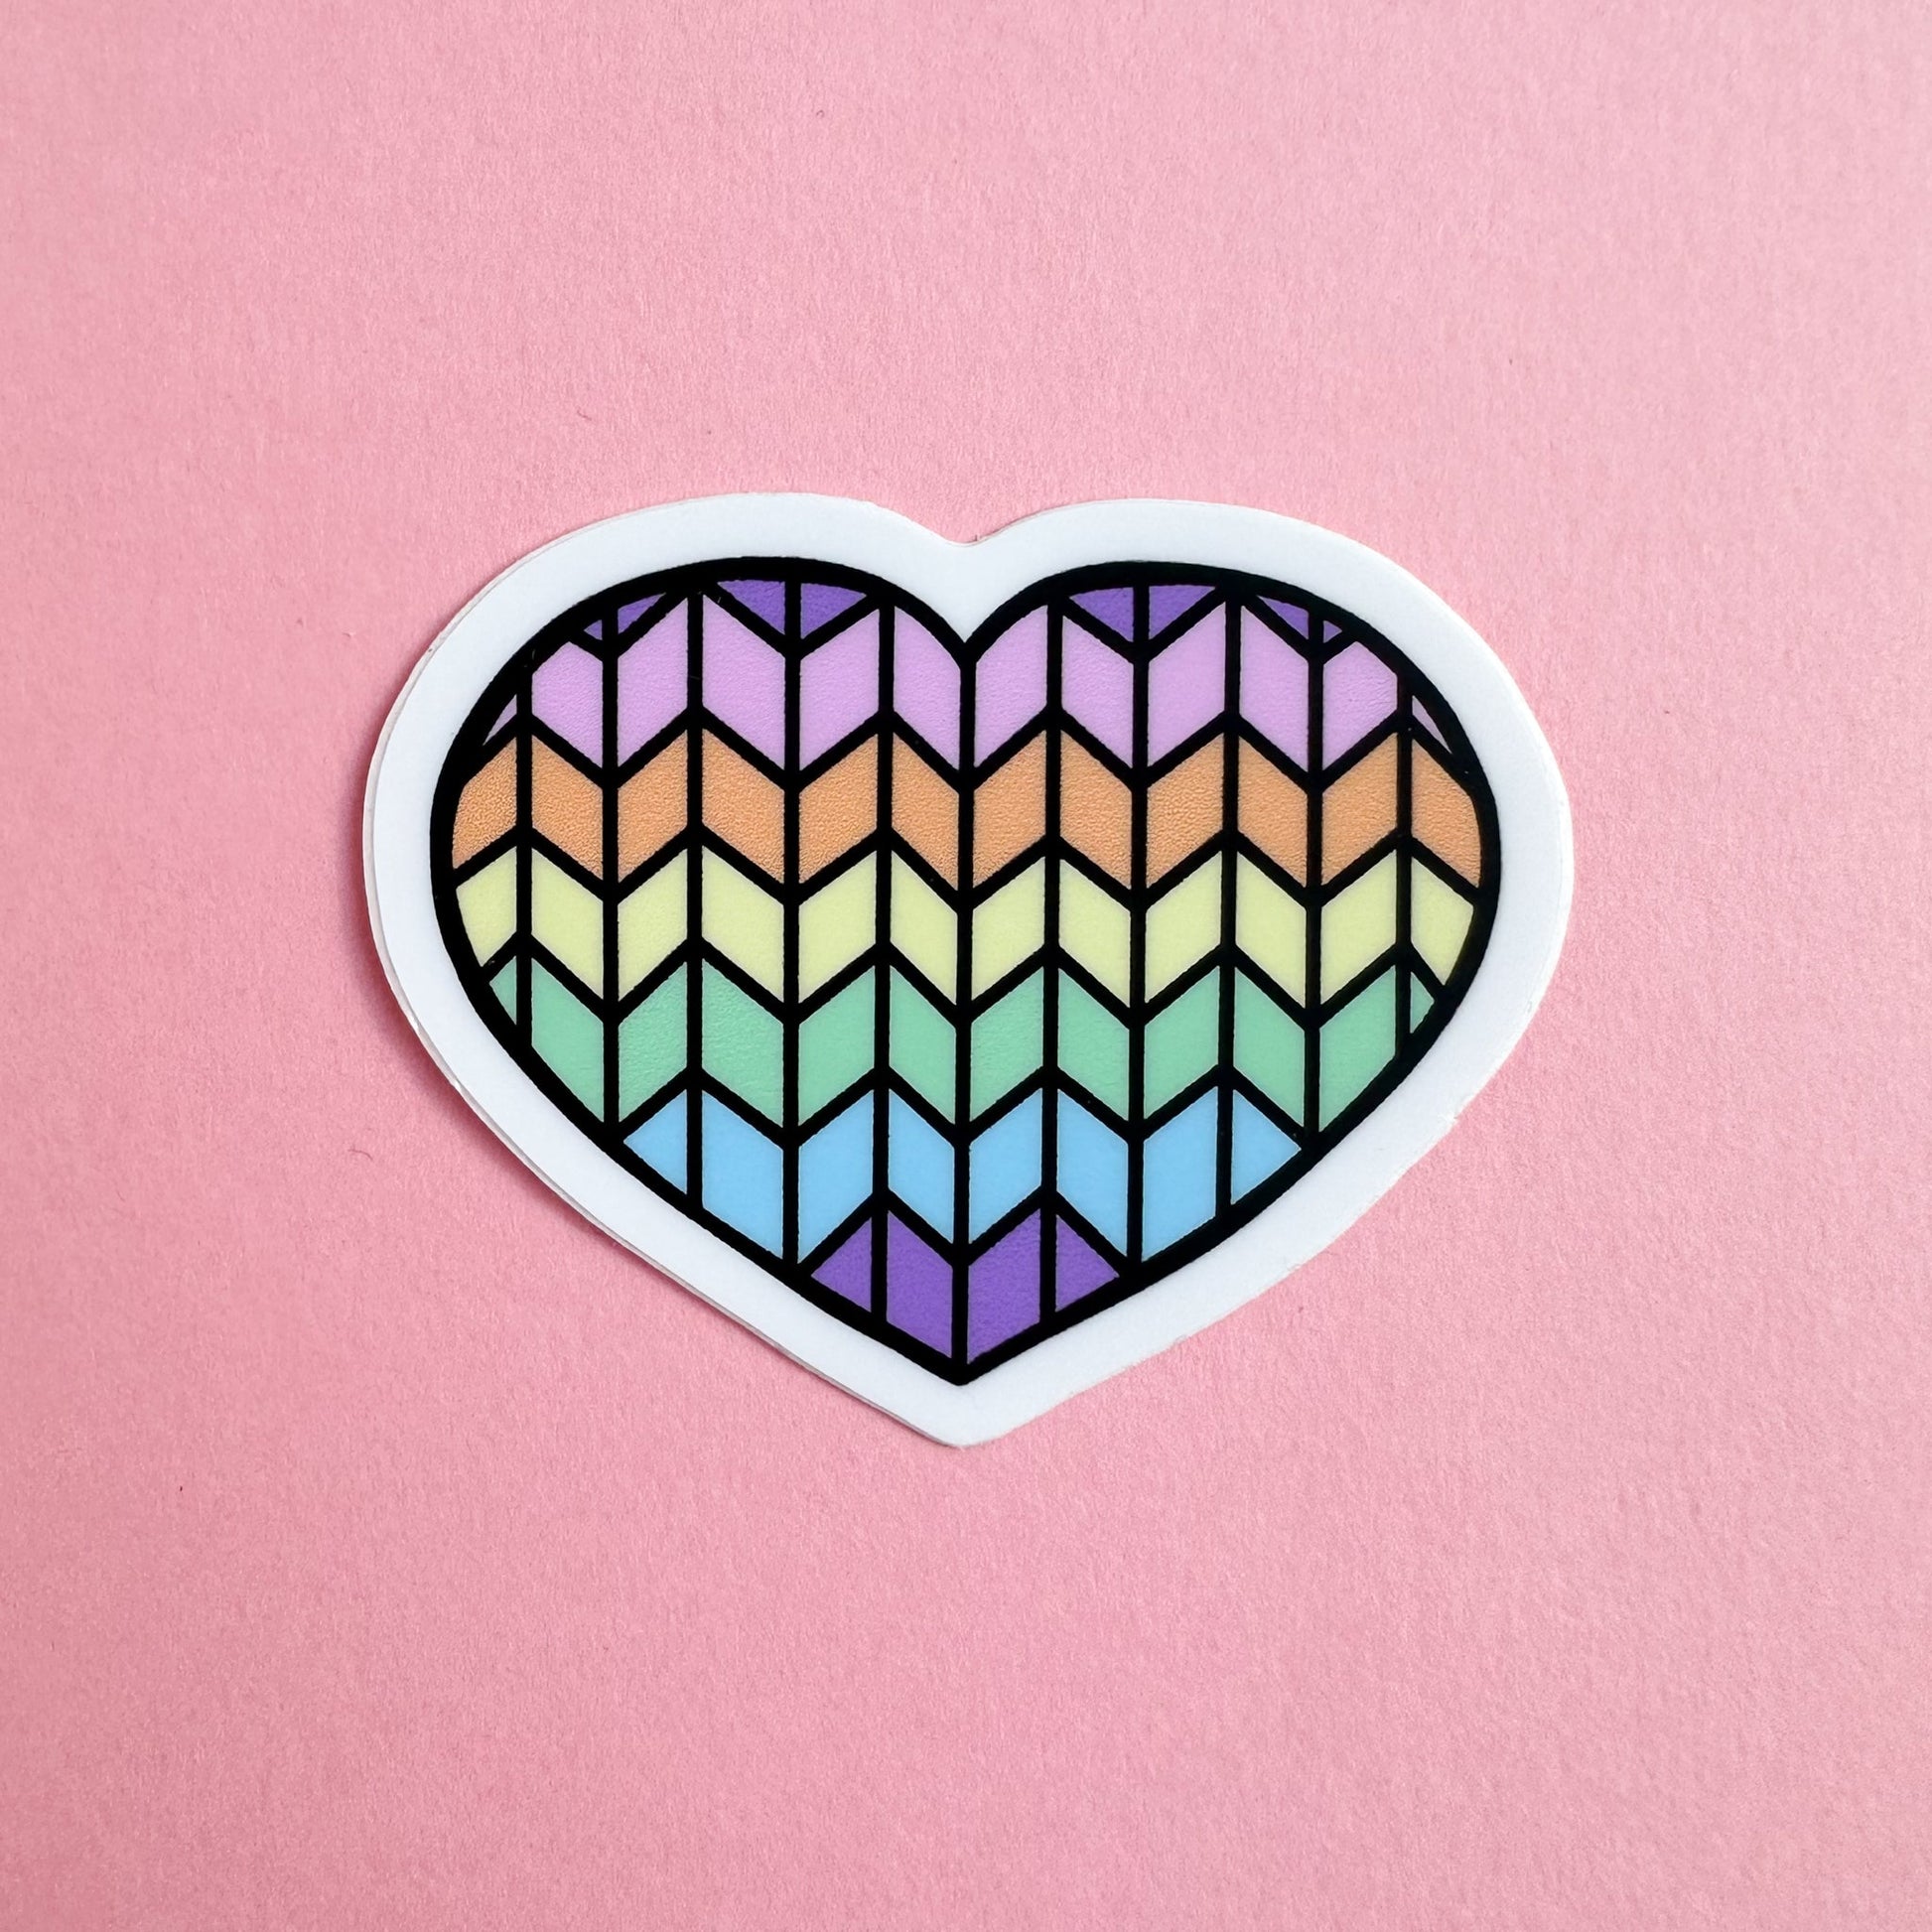 A heart shaped vinyl sticker with a pastel rainbow stockinette stitch pattern on it on a pink background